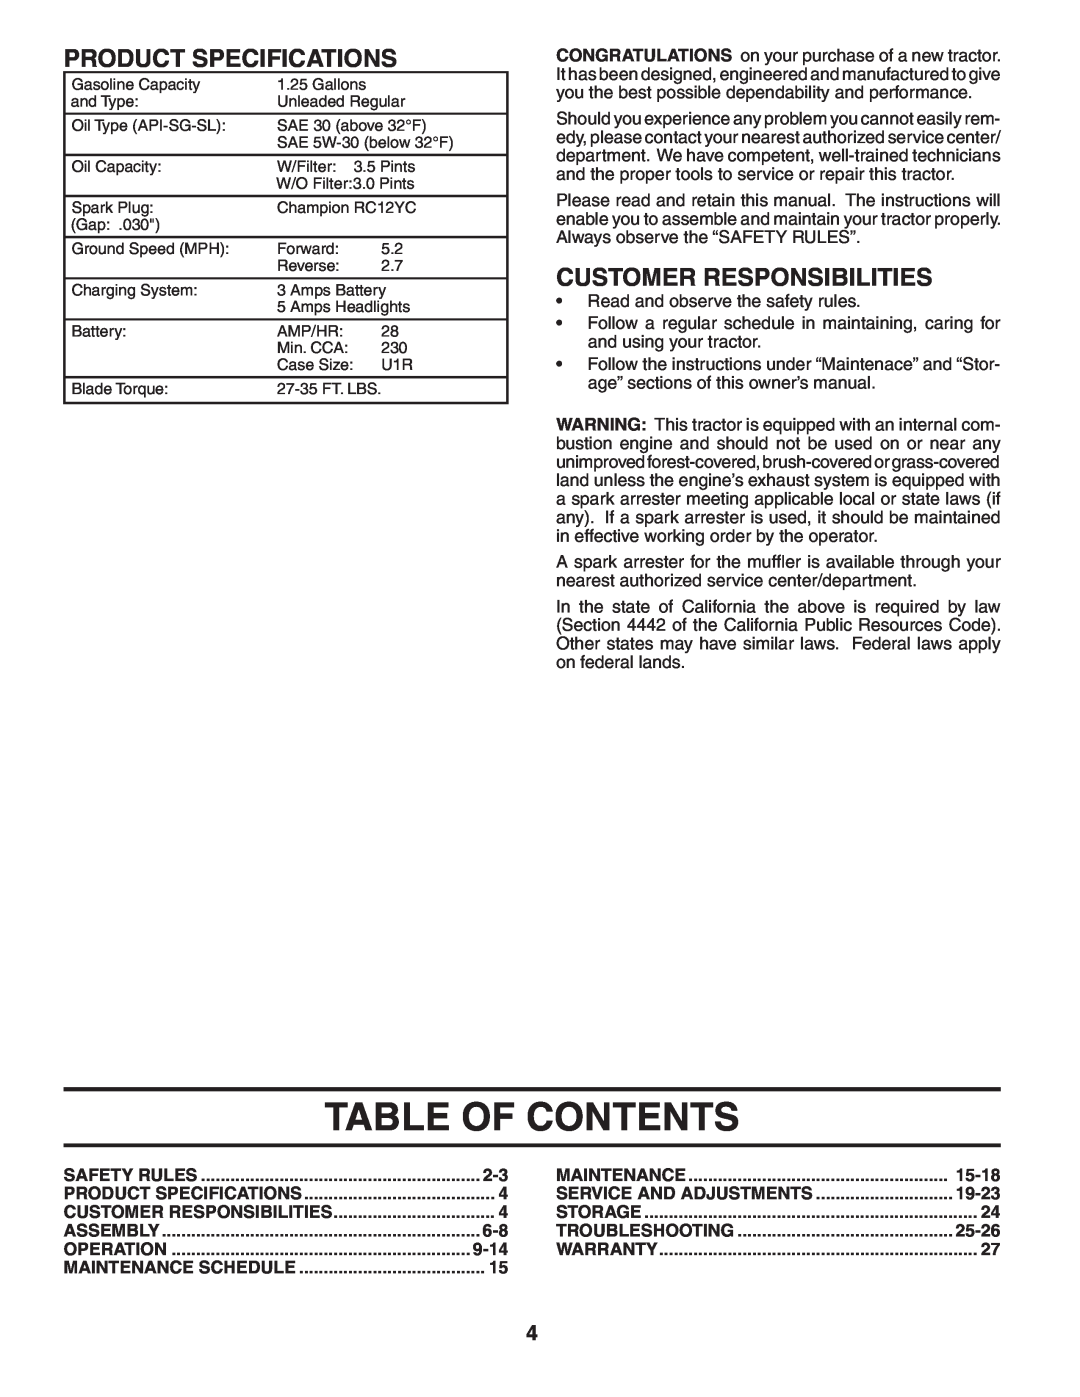 Poulan PB18H42LT manual Table Of Contents, Product Specifications, Customer Responsibilities, 9-14, 15-18, 19-23, 25-26 